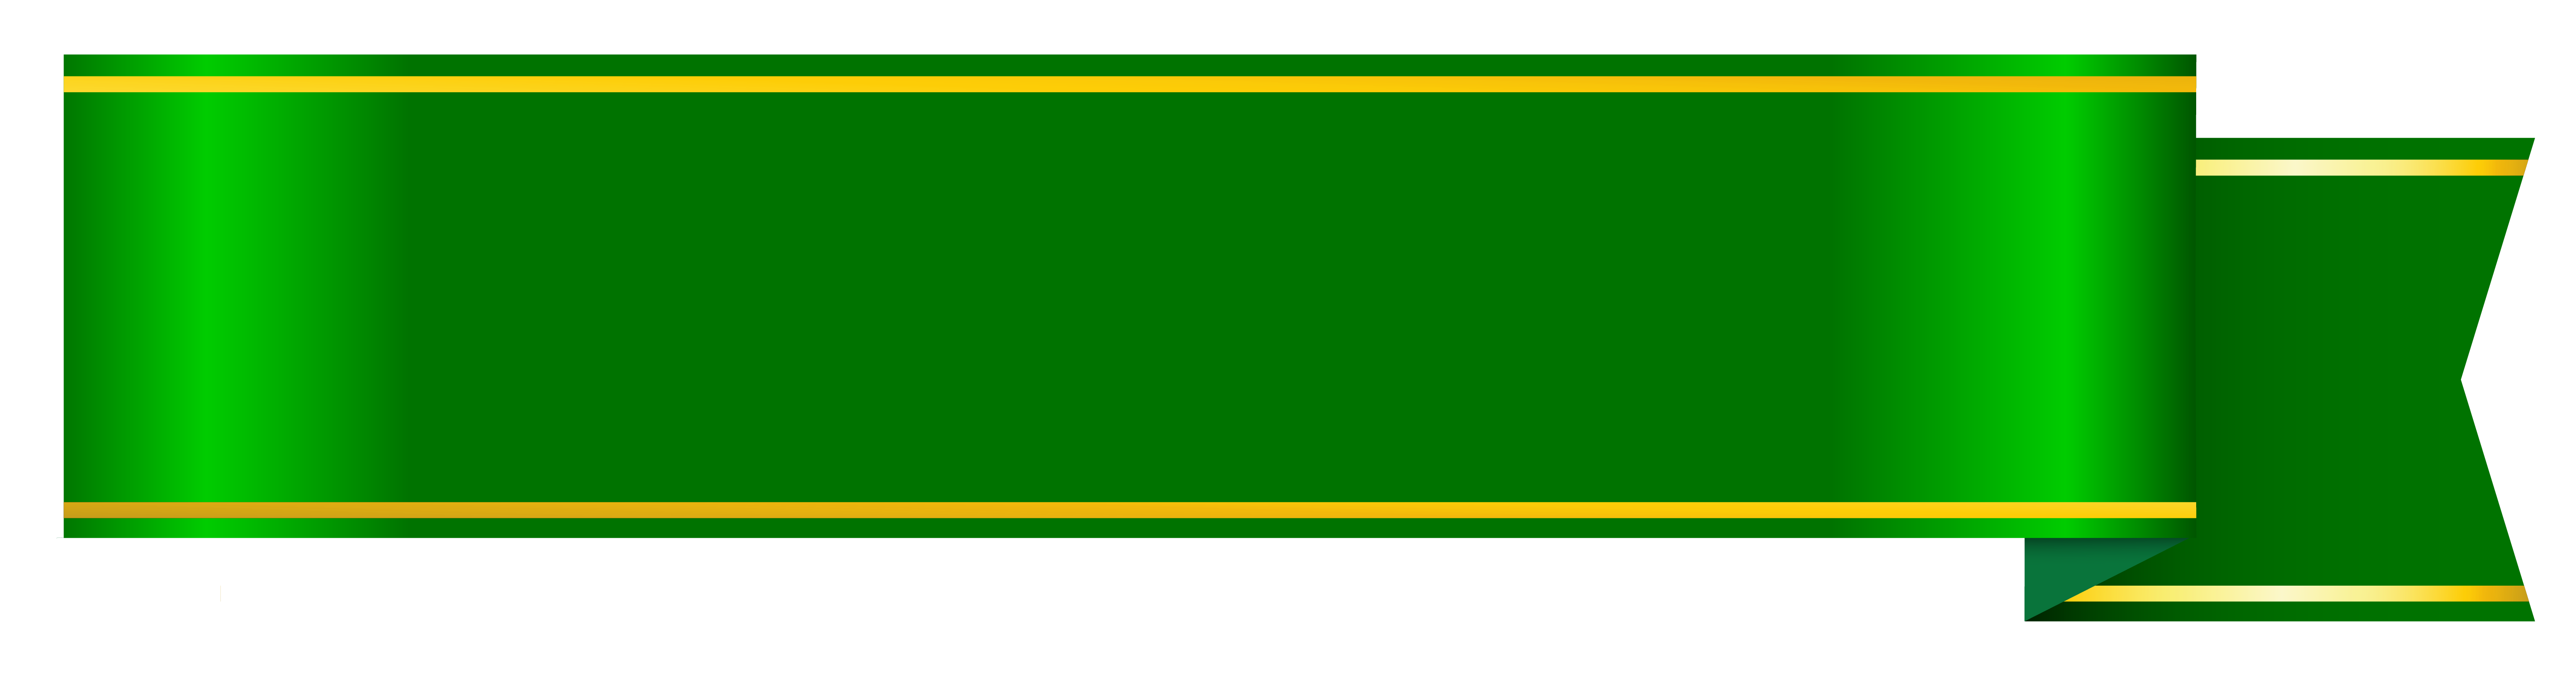 Flag clipart green. Banner png picture gallery